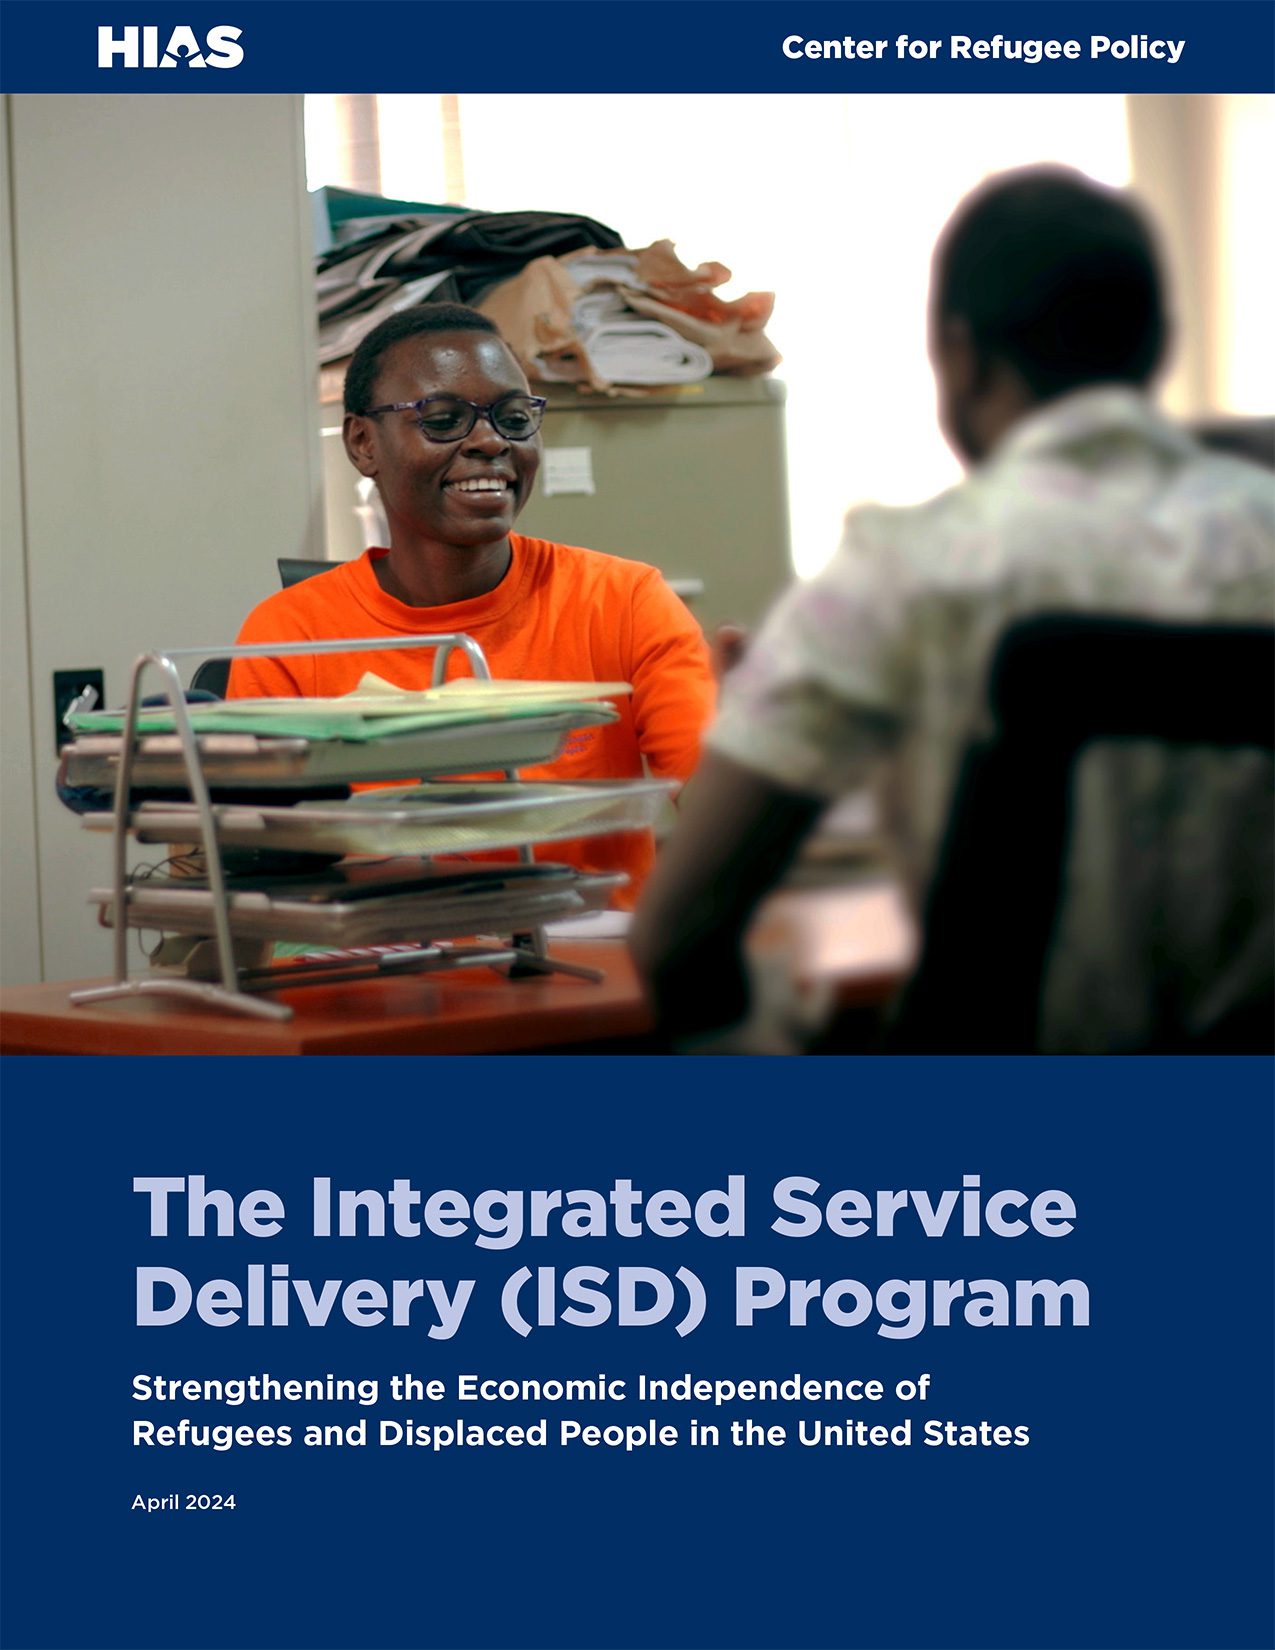 The Integrated Service Delivery (ISD) Program